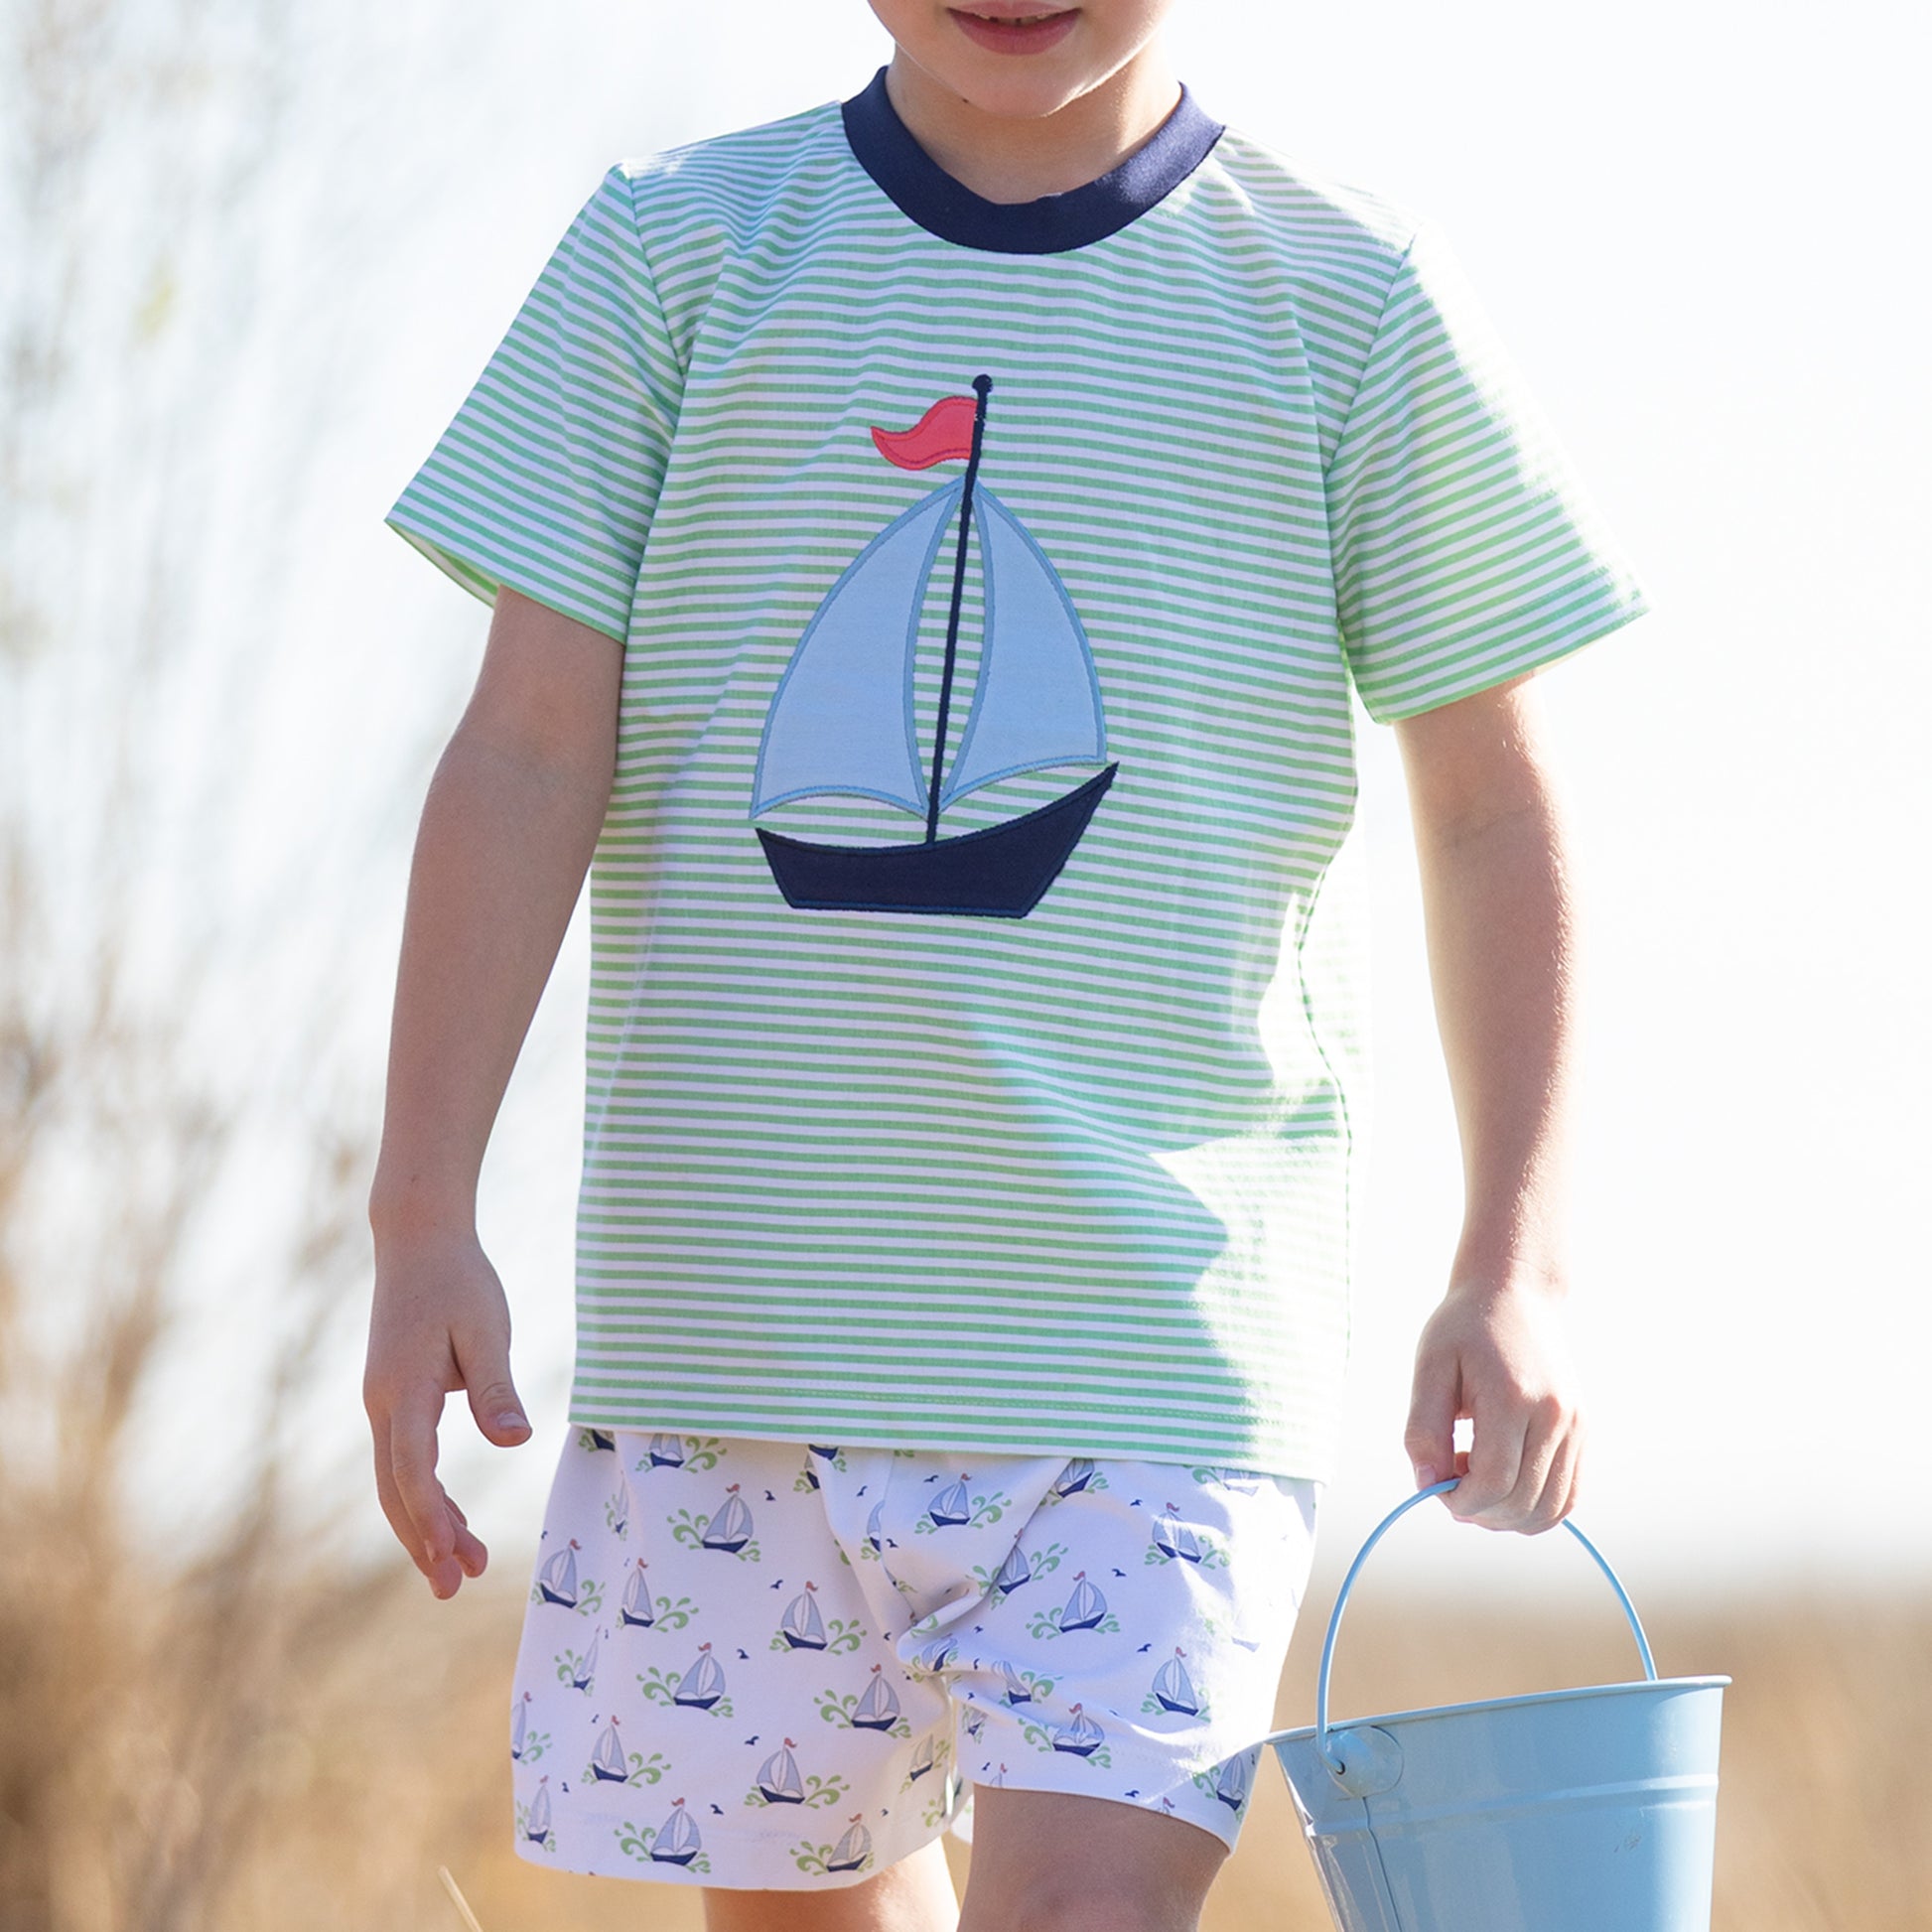 a boy wearing Beneteau T Shirt Set and holding a sand pale on the beach